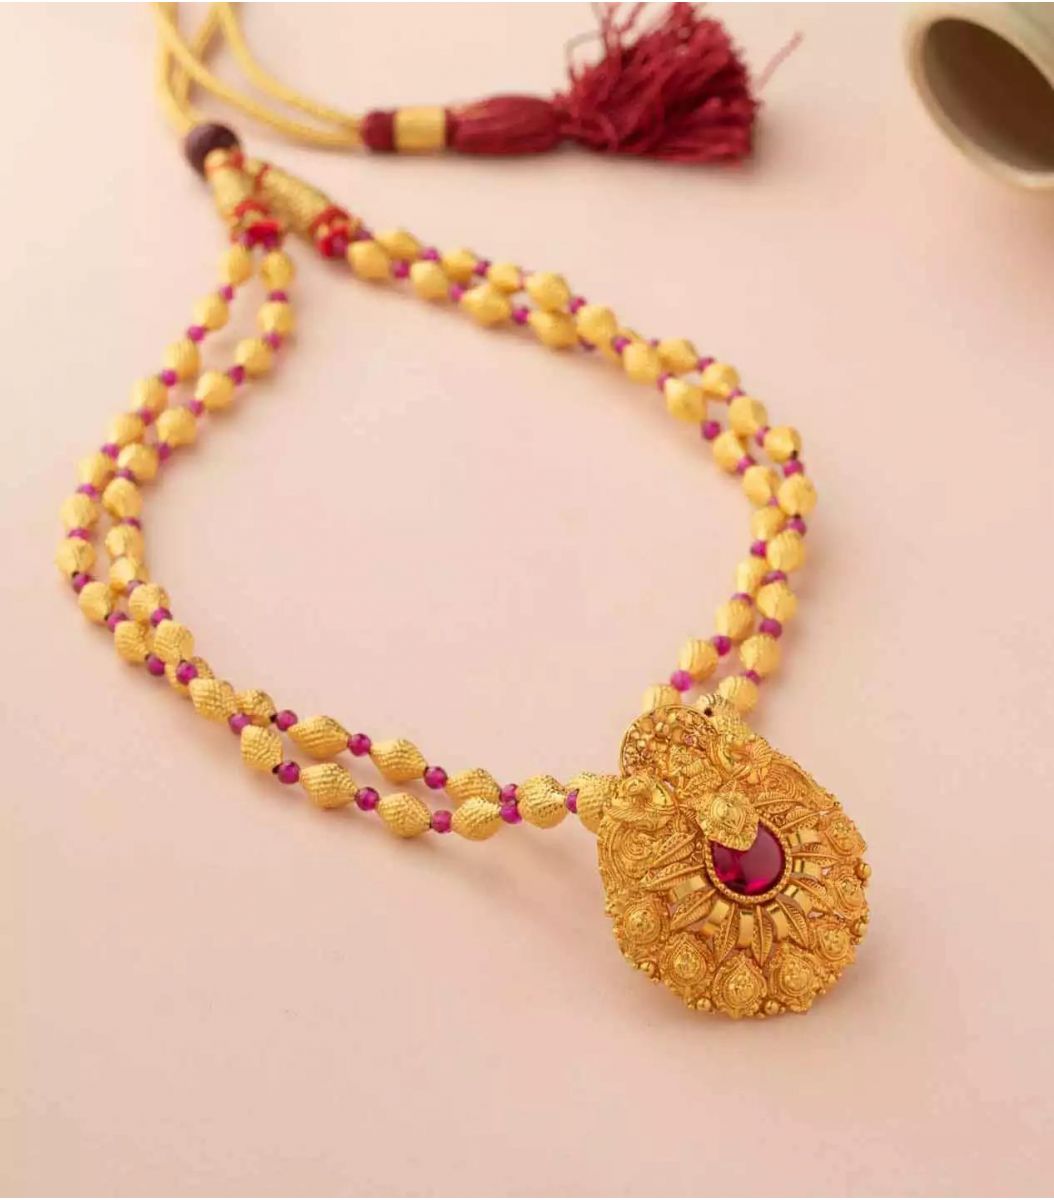 Buy Gold Necklace Online At Best Price P N Gadgil & Sons